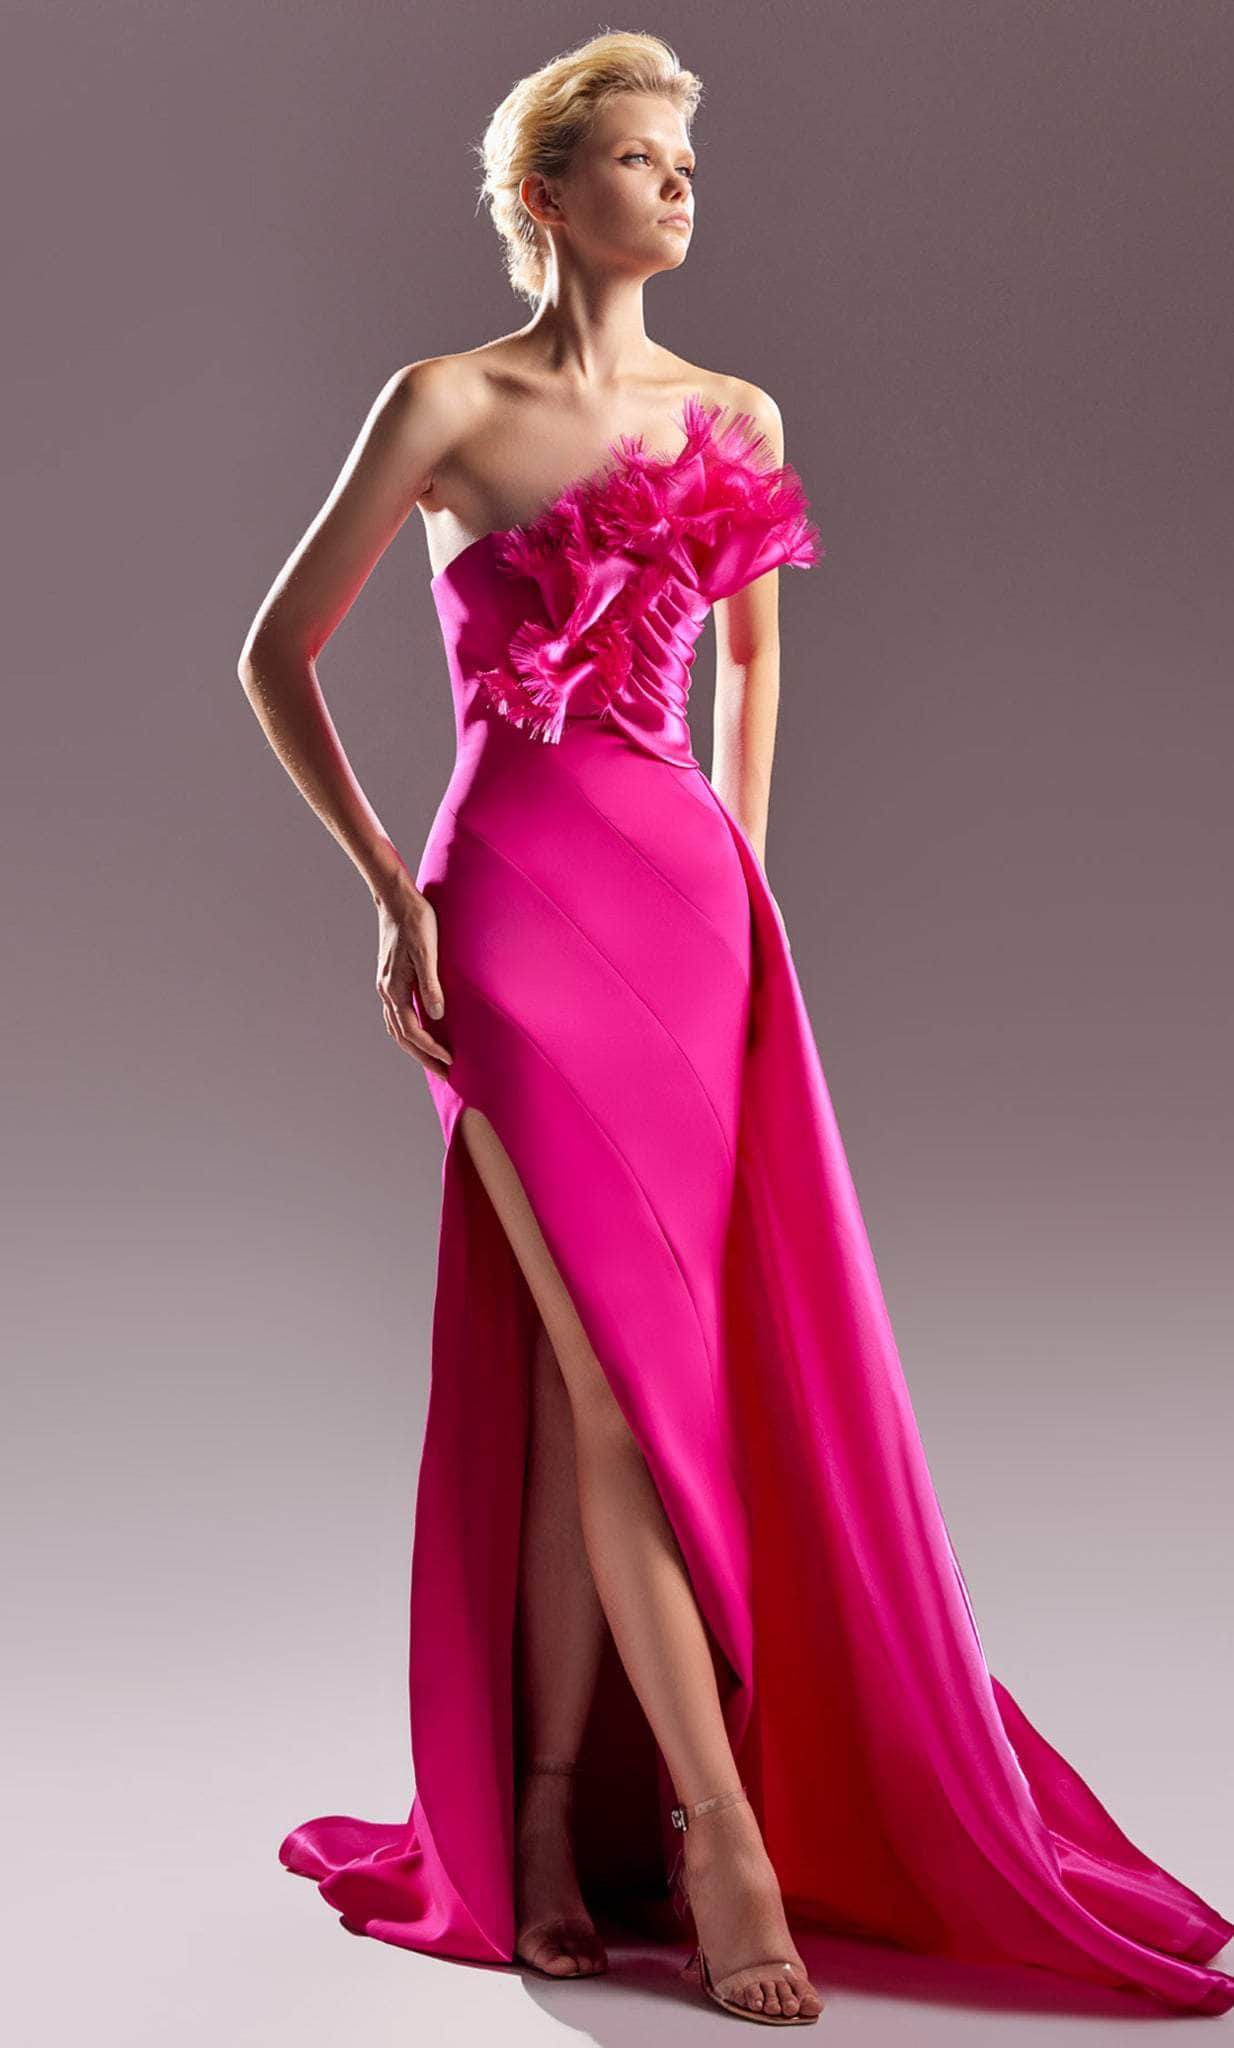 MNM COUTURE G1500 - Strapless Fringed Evening Gown Evening Dresses